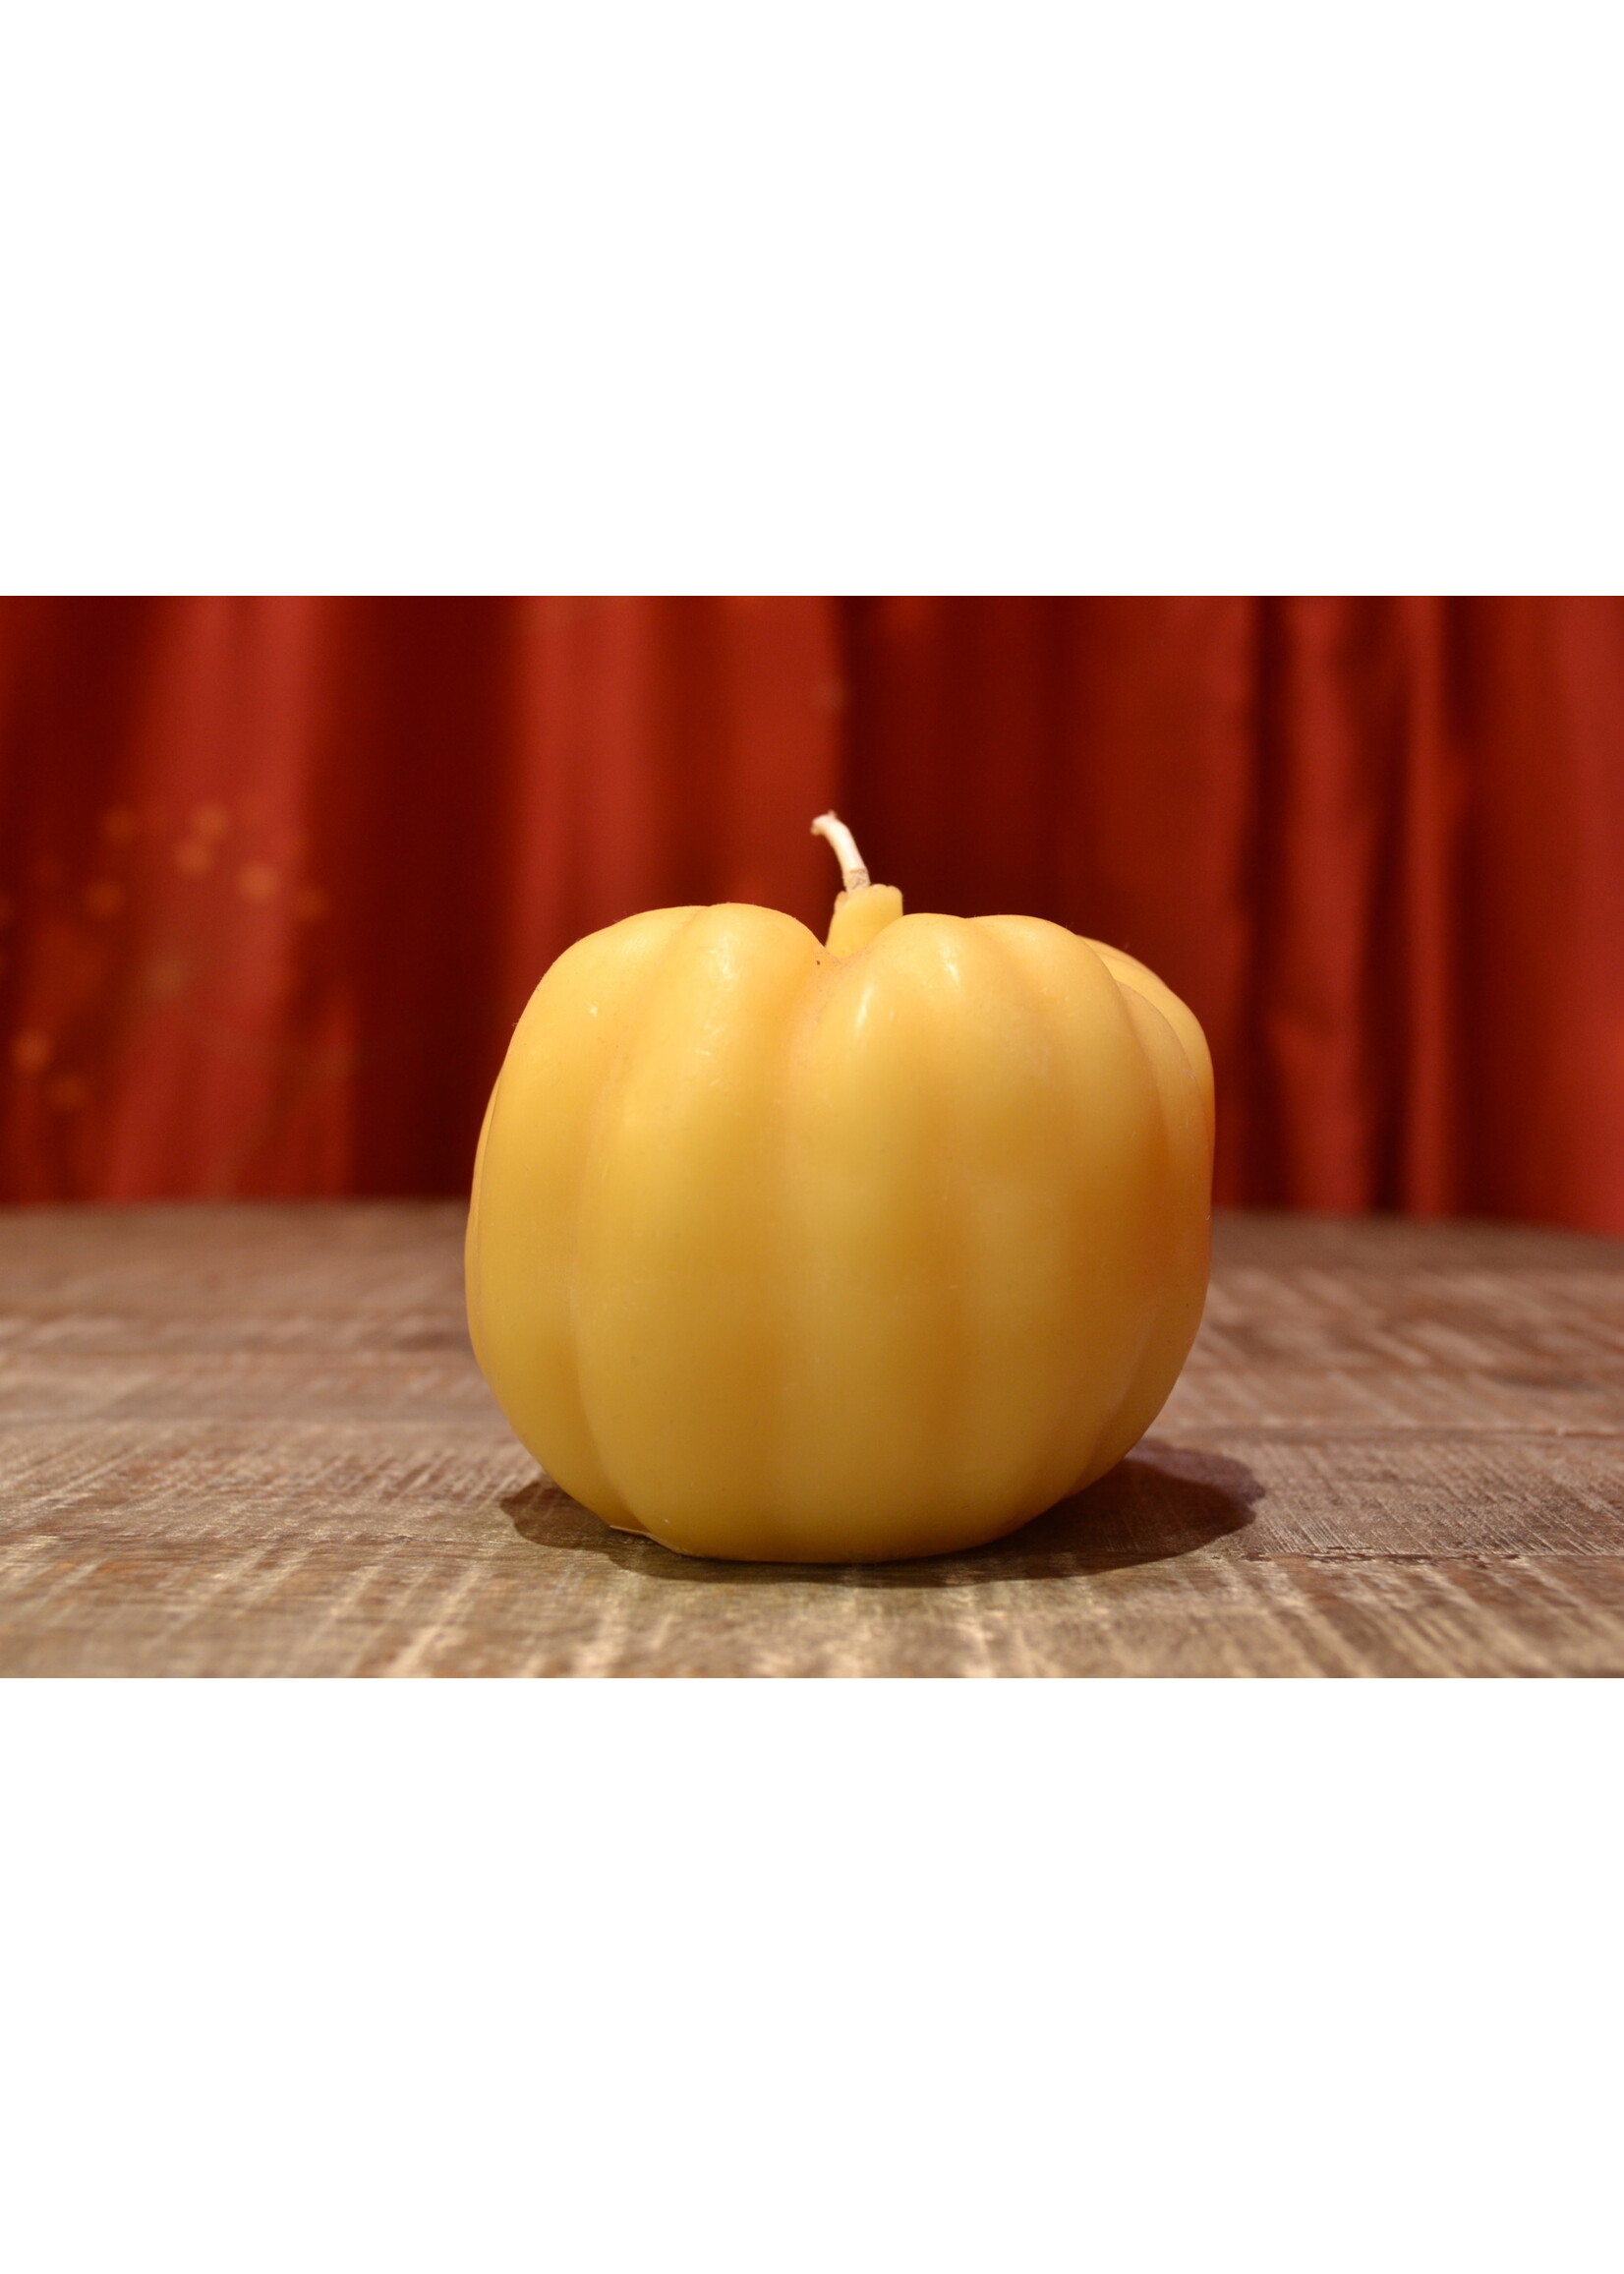 100% Pure Beeswax Pumpkin Candle - Large